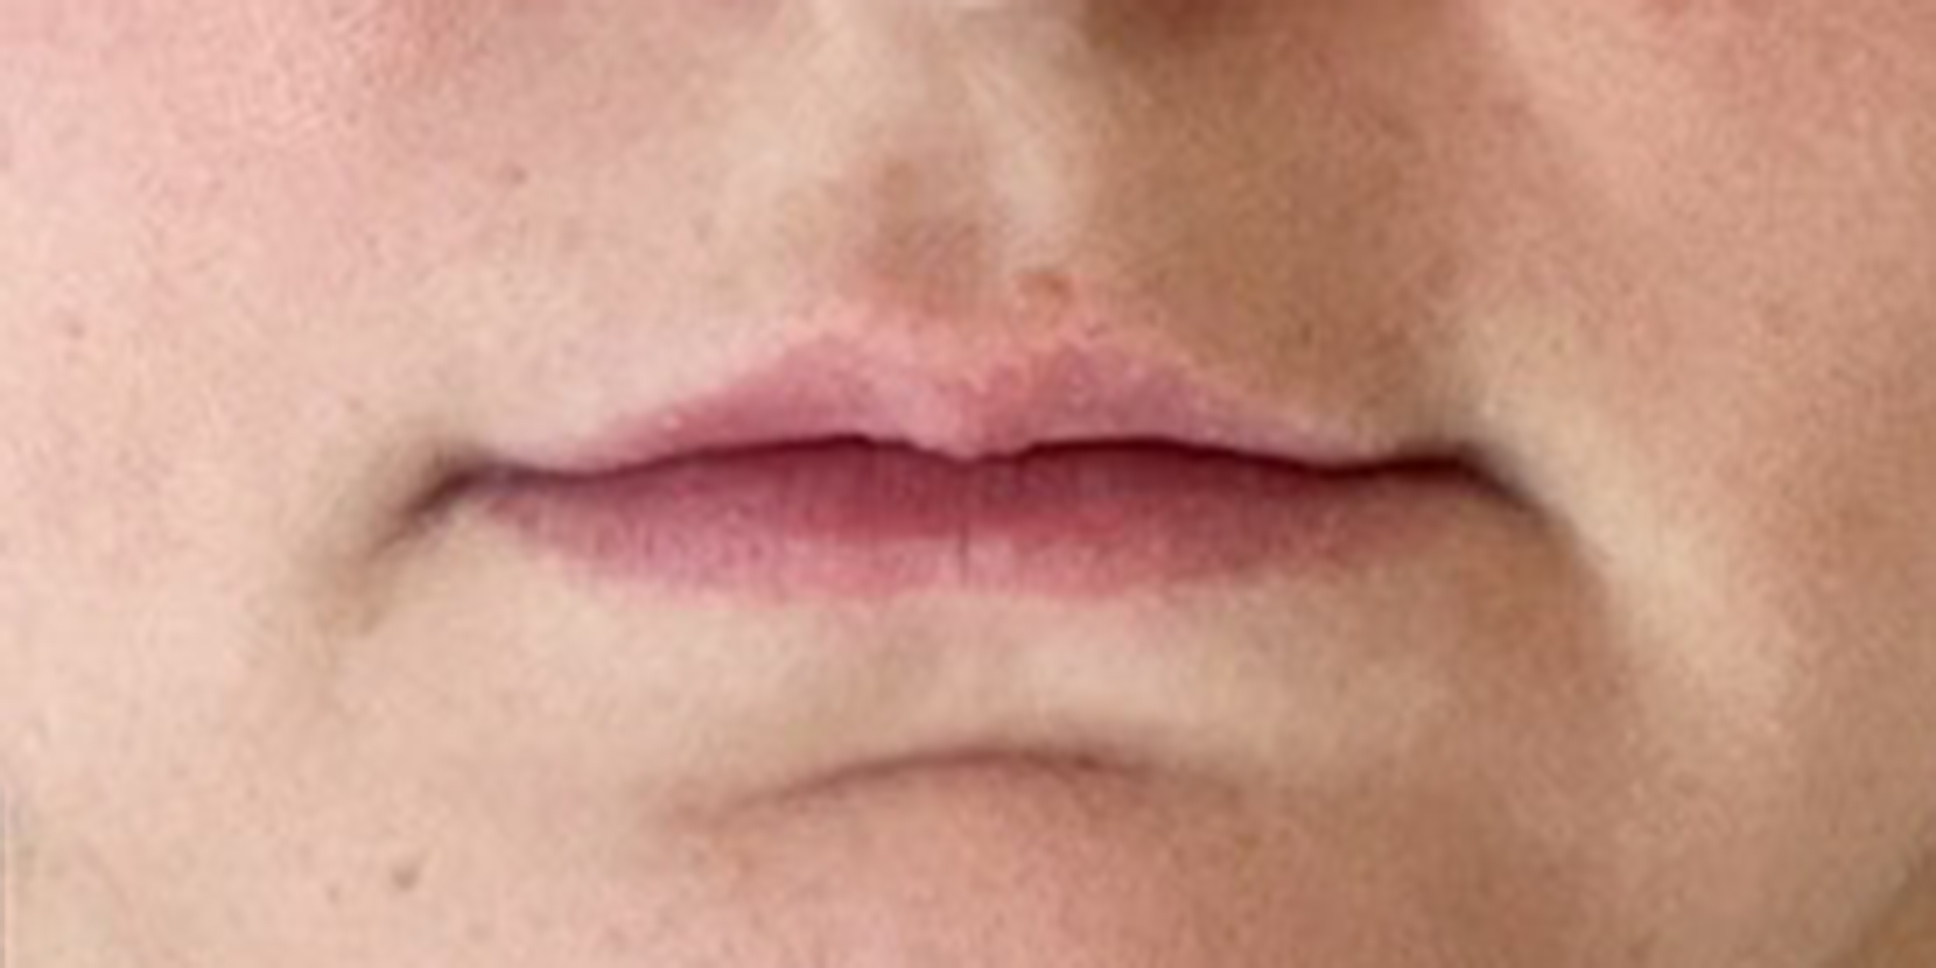 After Lip Filler Injections